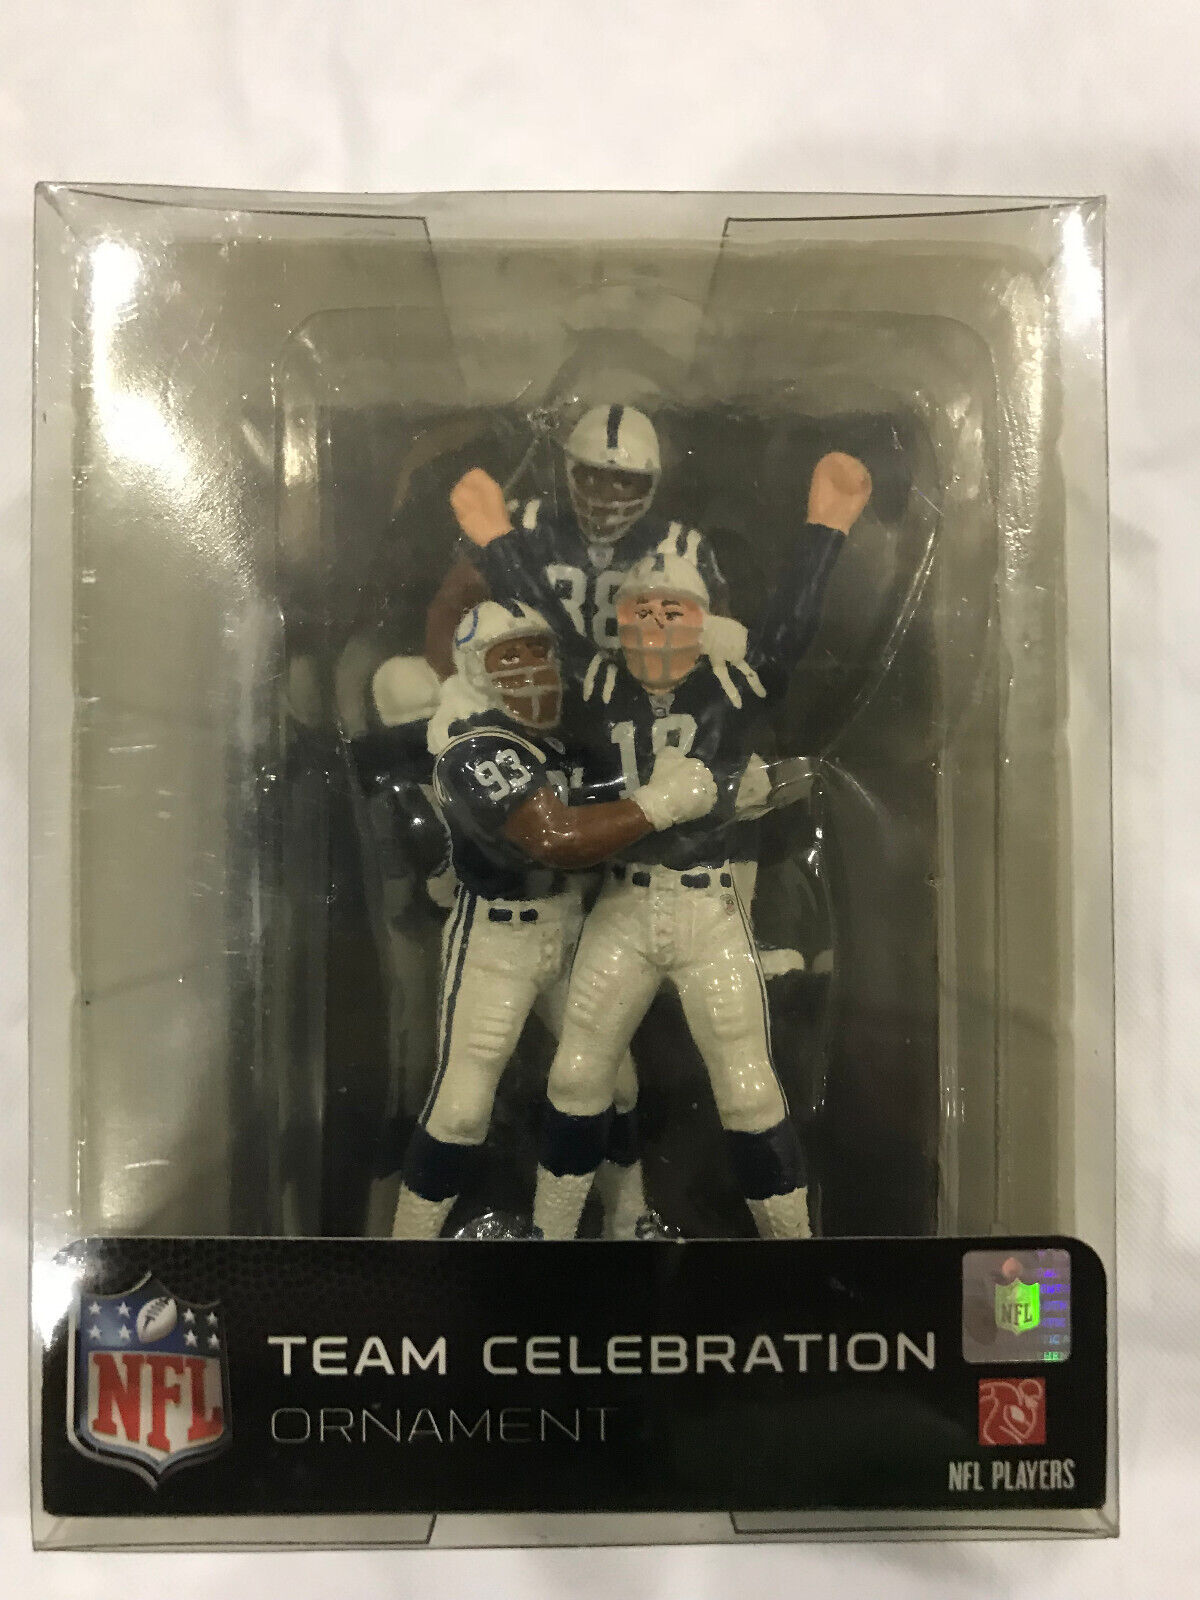 NFL INDIANAPOLIS COLTS TEAM PLAYER ORNAMENT